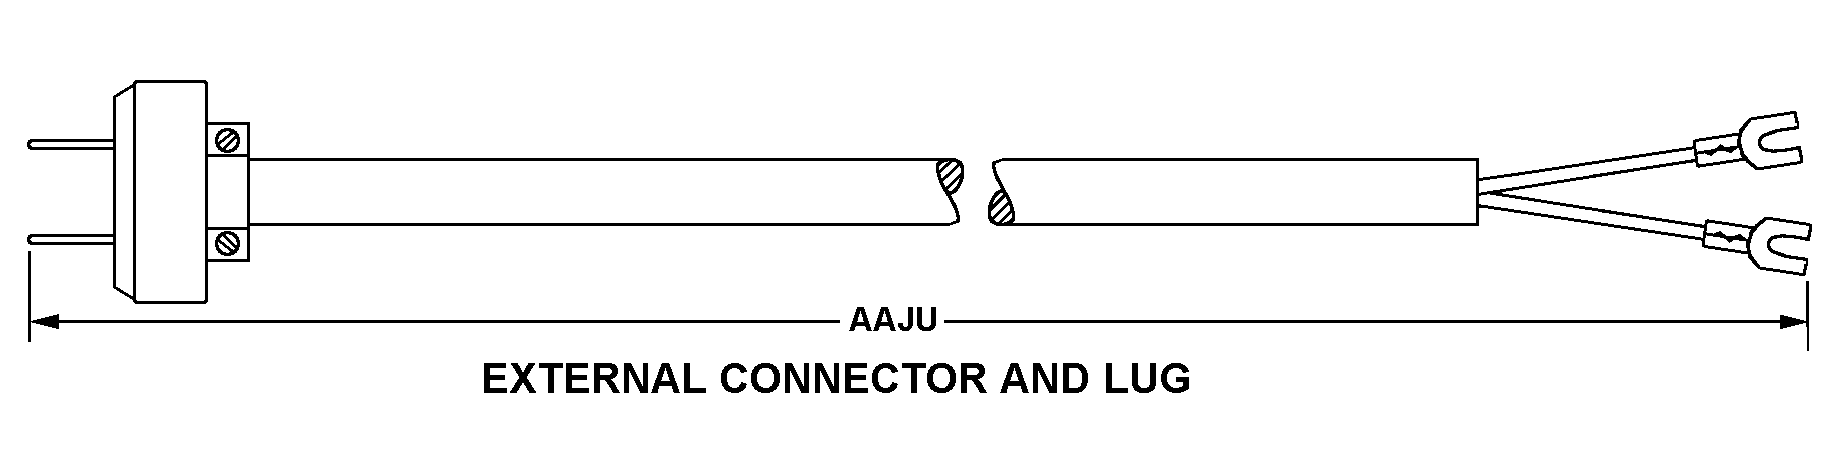 EXTERNAL CONNECTOR AND LUG style nsn 6150-01-413-0843